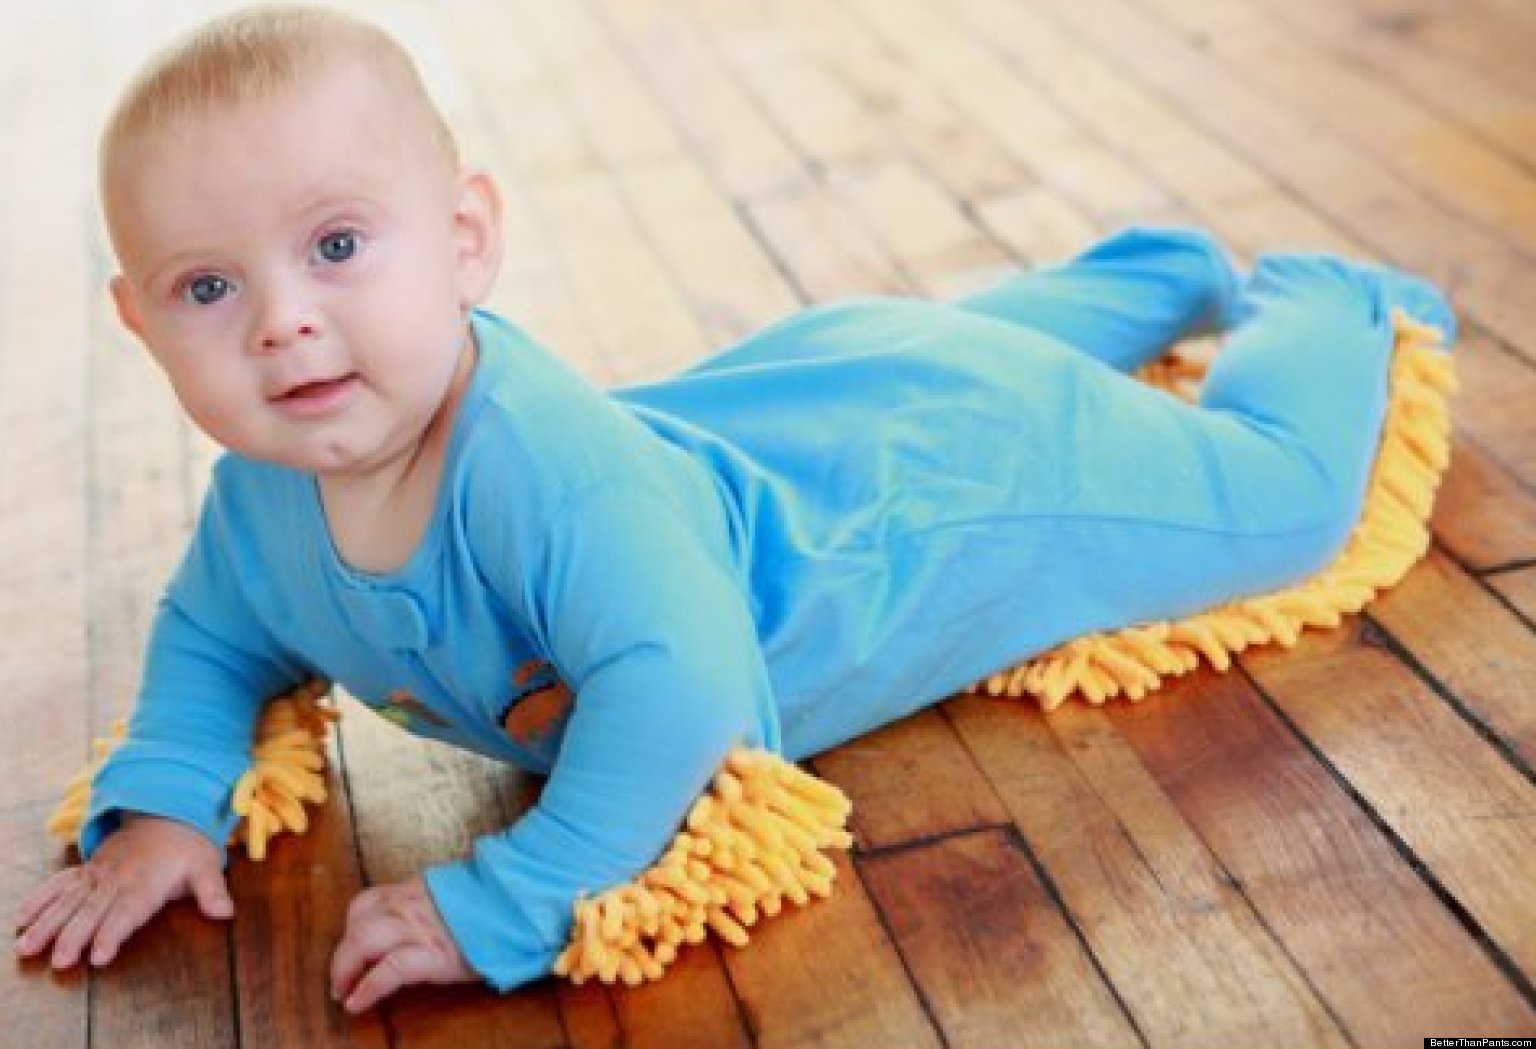 The Baby Mop Is A Serious Product, So Commenters Have Serious Concerns